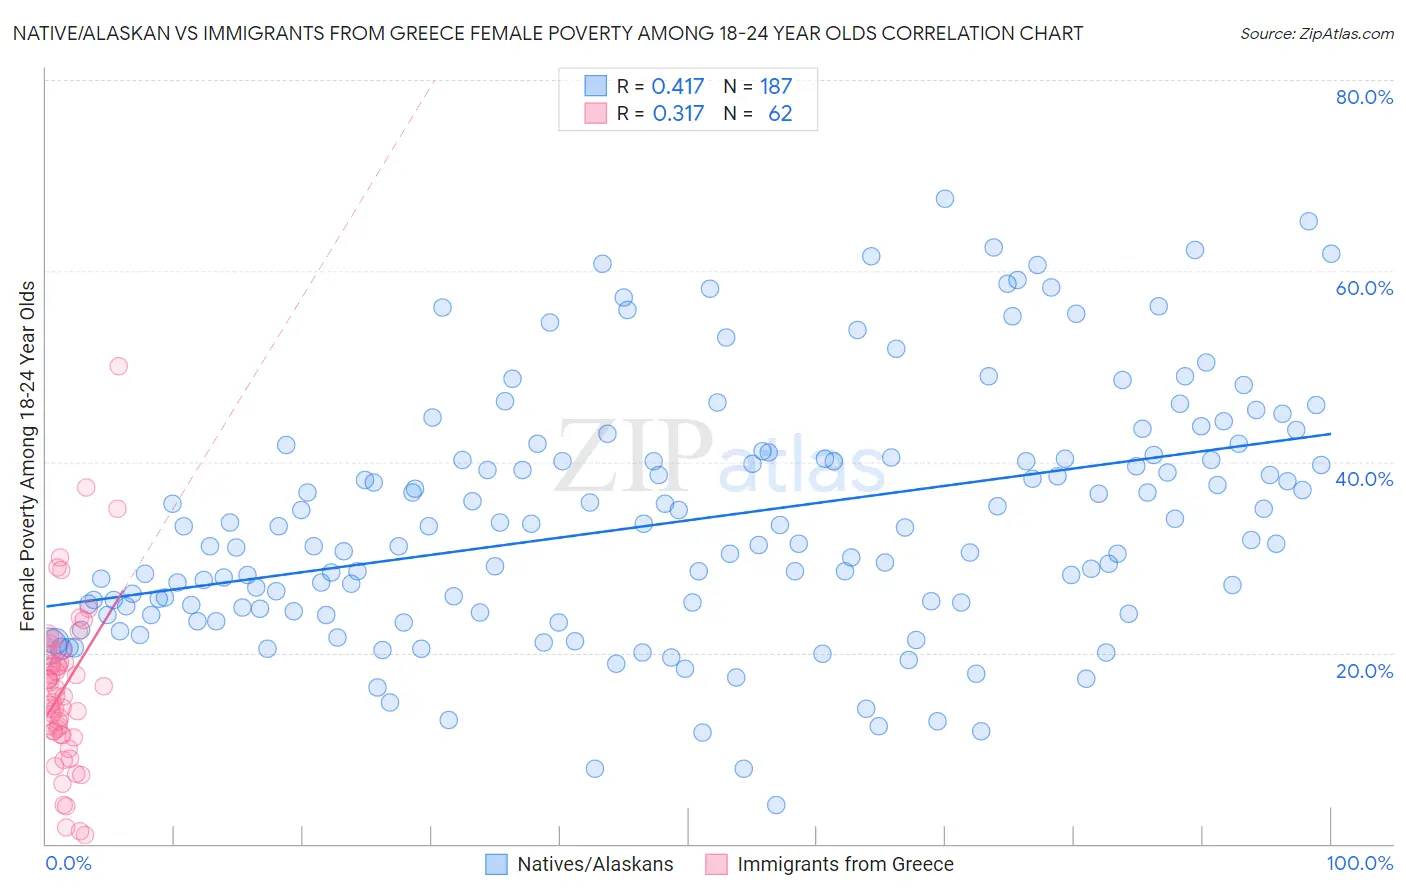 Native/Alaskan vs Immigrants from Greece Female Poverty Among 18-24 Year Olds